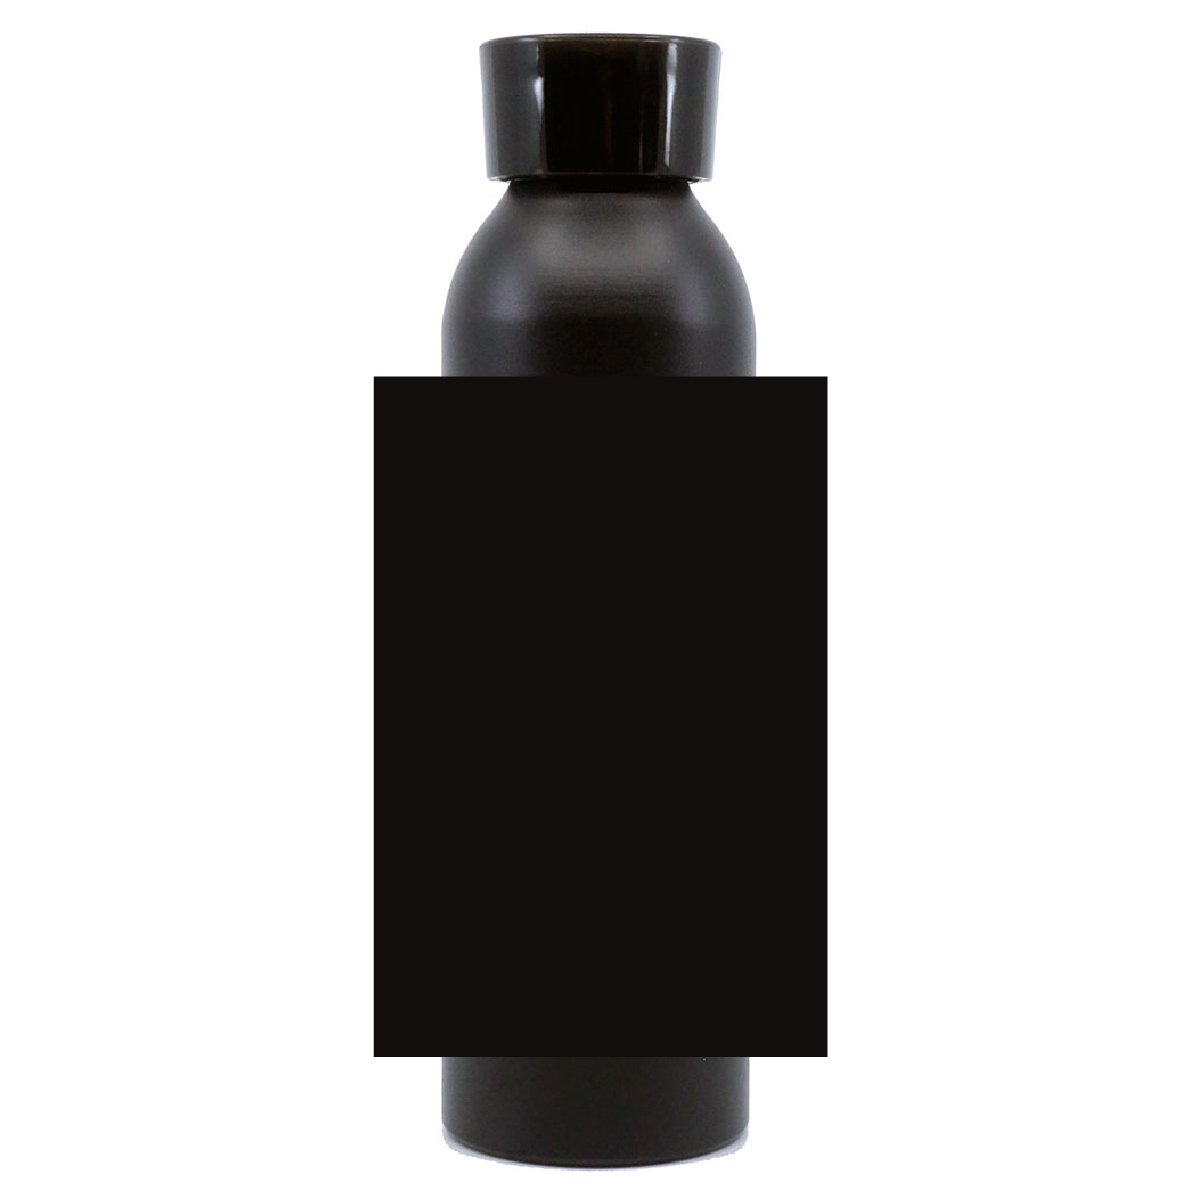 Black 20 oz. Aluminum Bottle with Silicone Carrying Strap